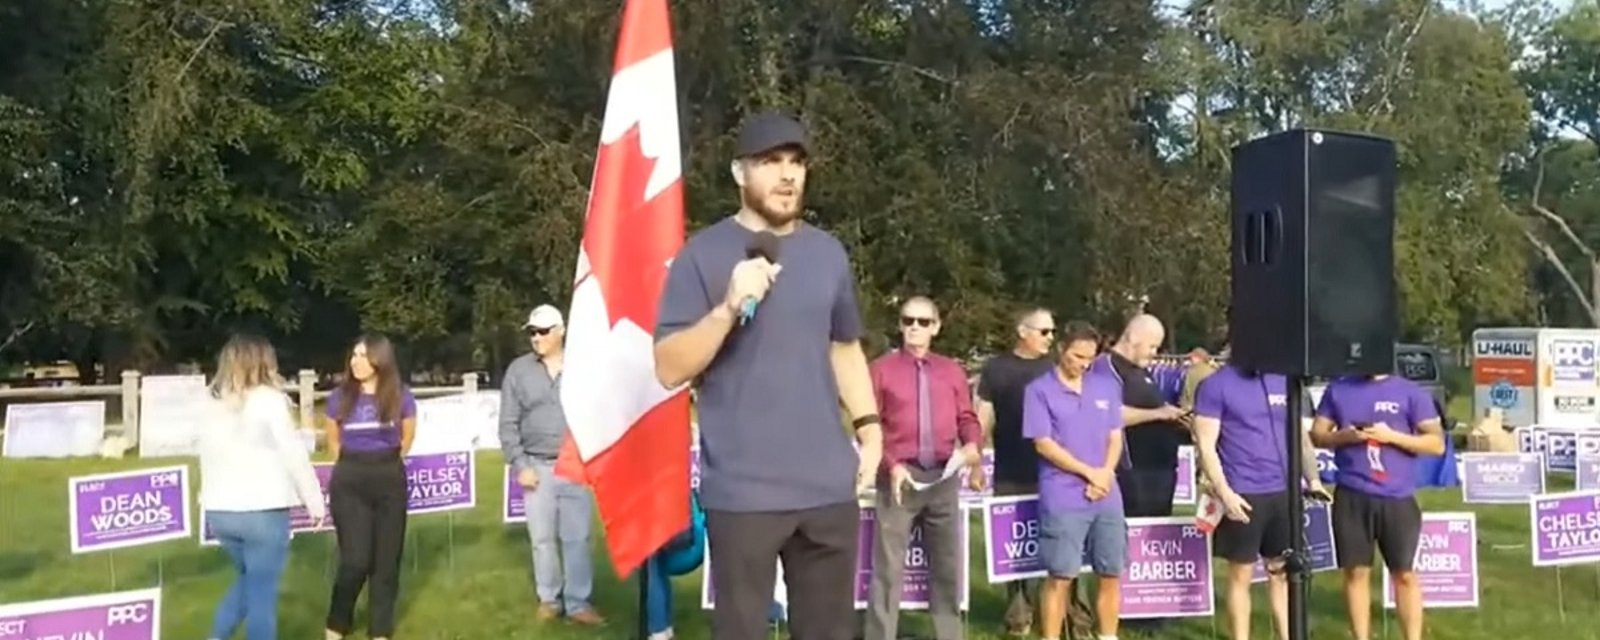 Zac Rinaldo takes a strong stance on vaccine mandates during political rally.